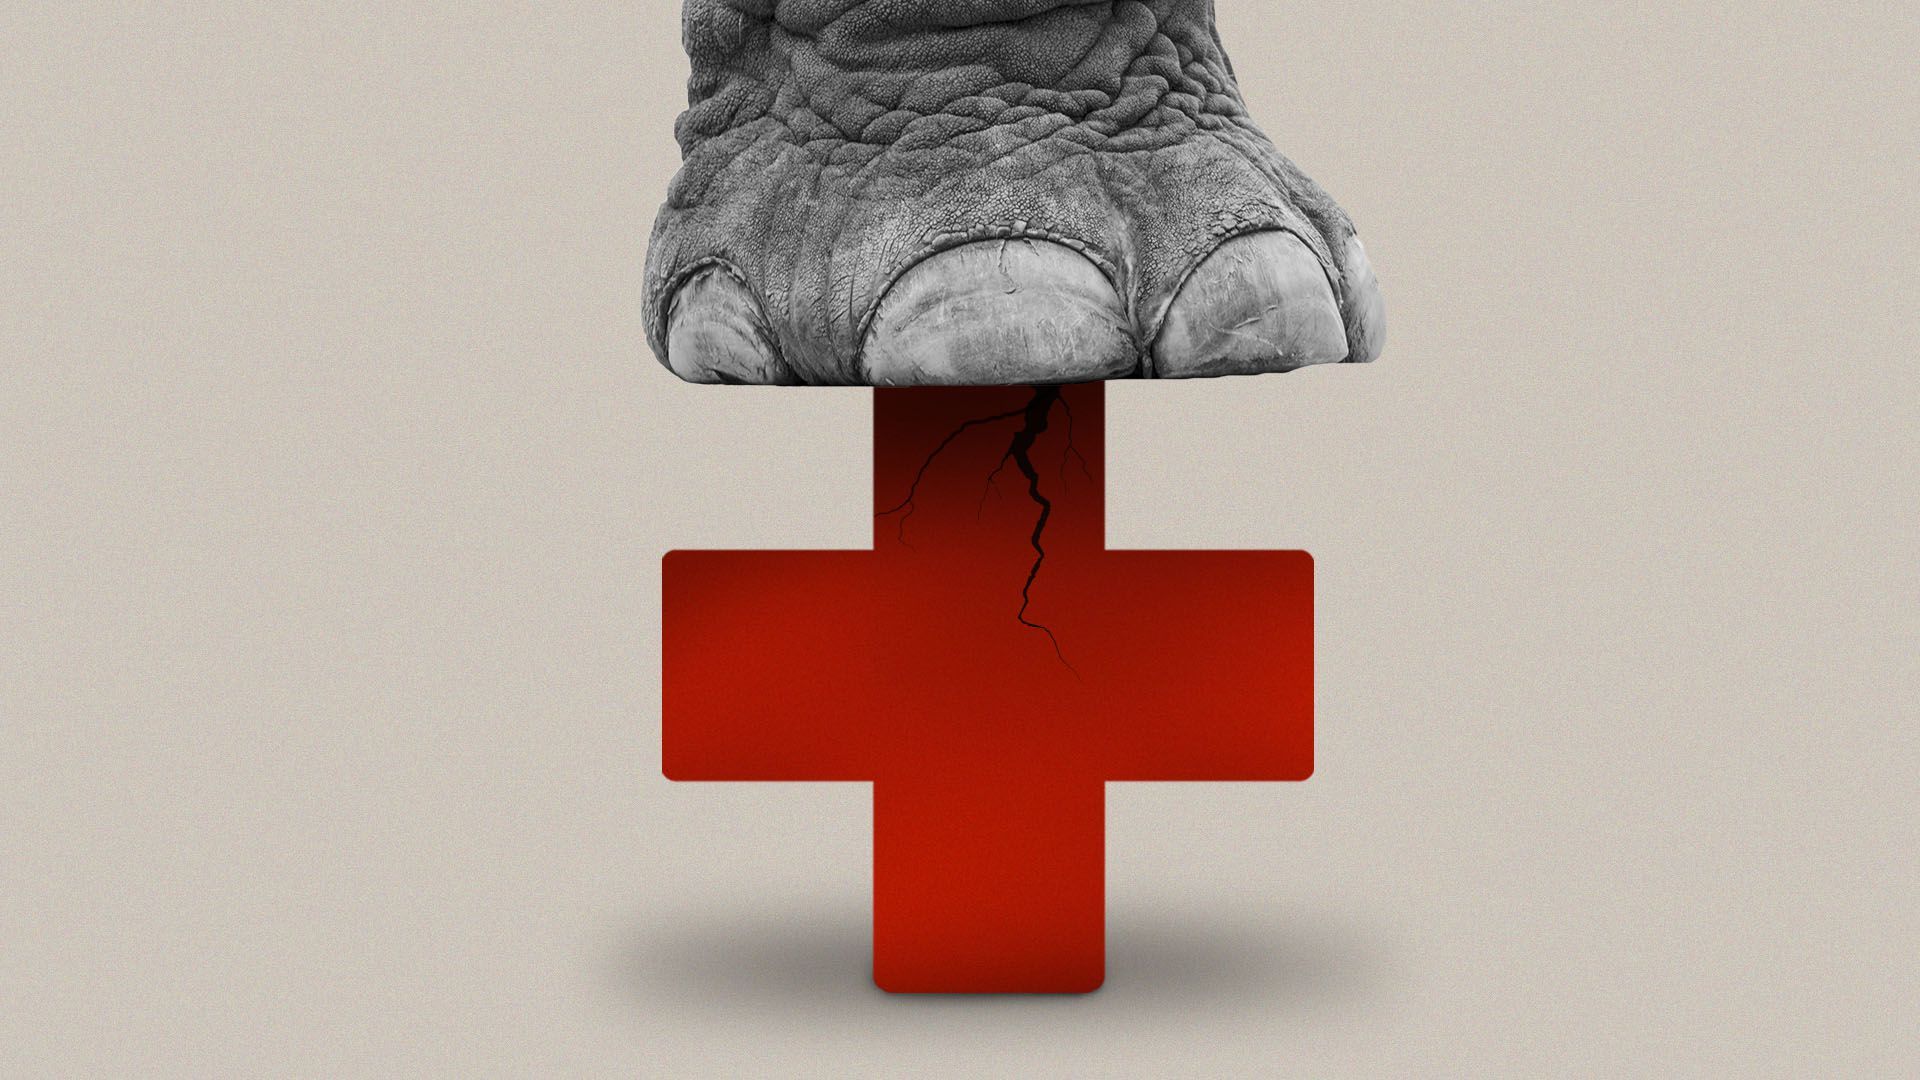 illustration of an elephant's foot crushing a red cross symbol 